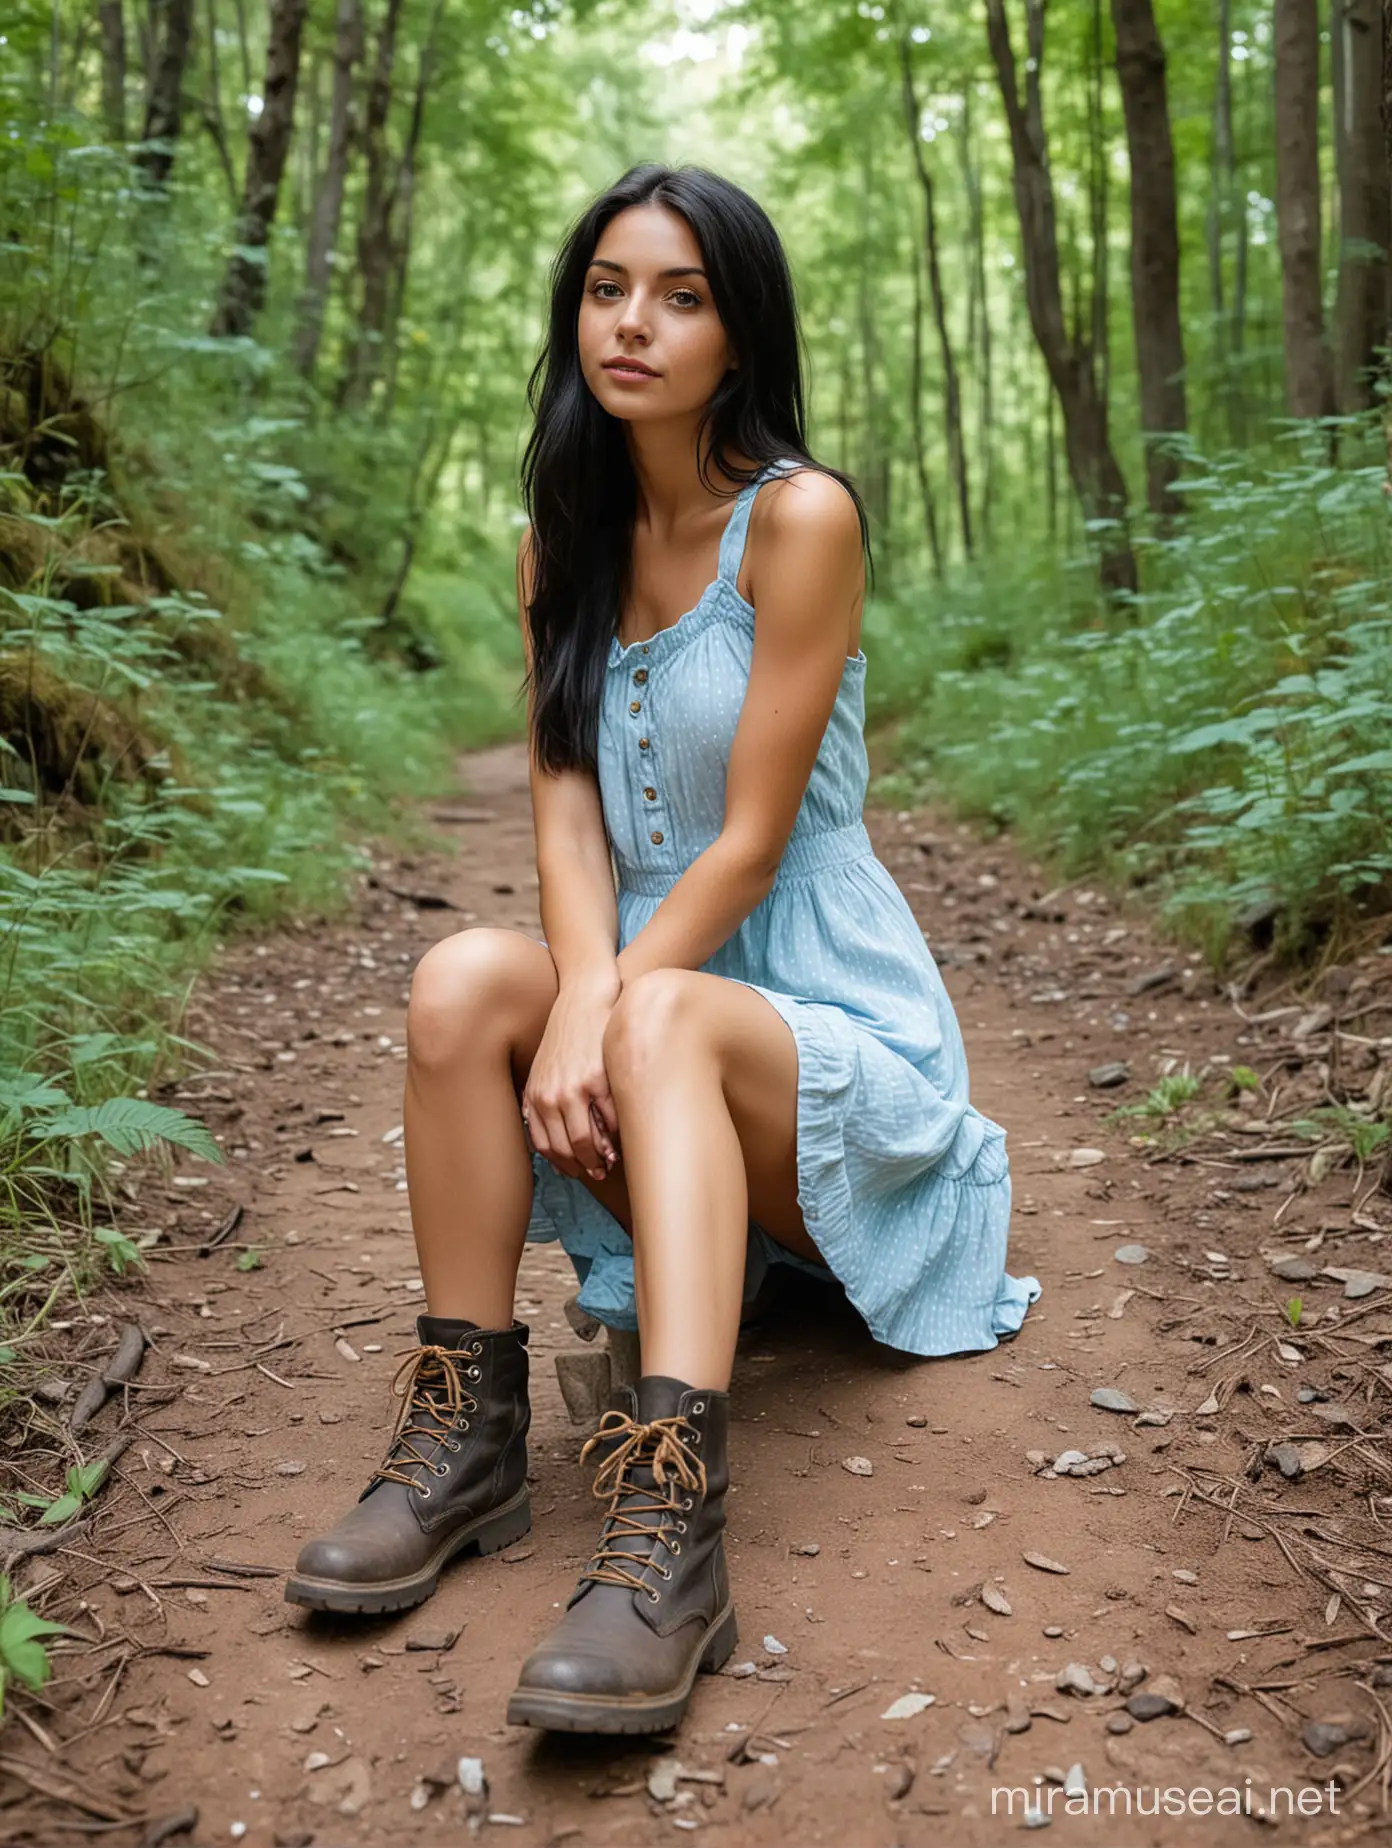 short skinny girl, long black hair, hazel eyes, light blue small sundress, hiking boots, sitting on the side of a forest trail